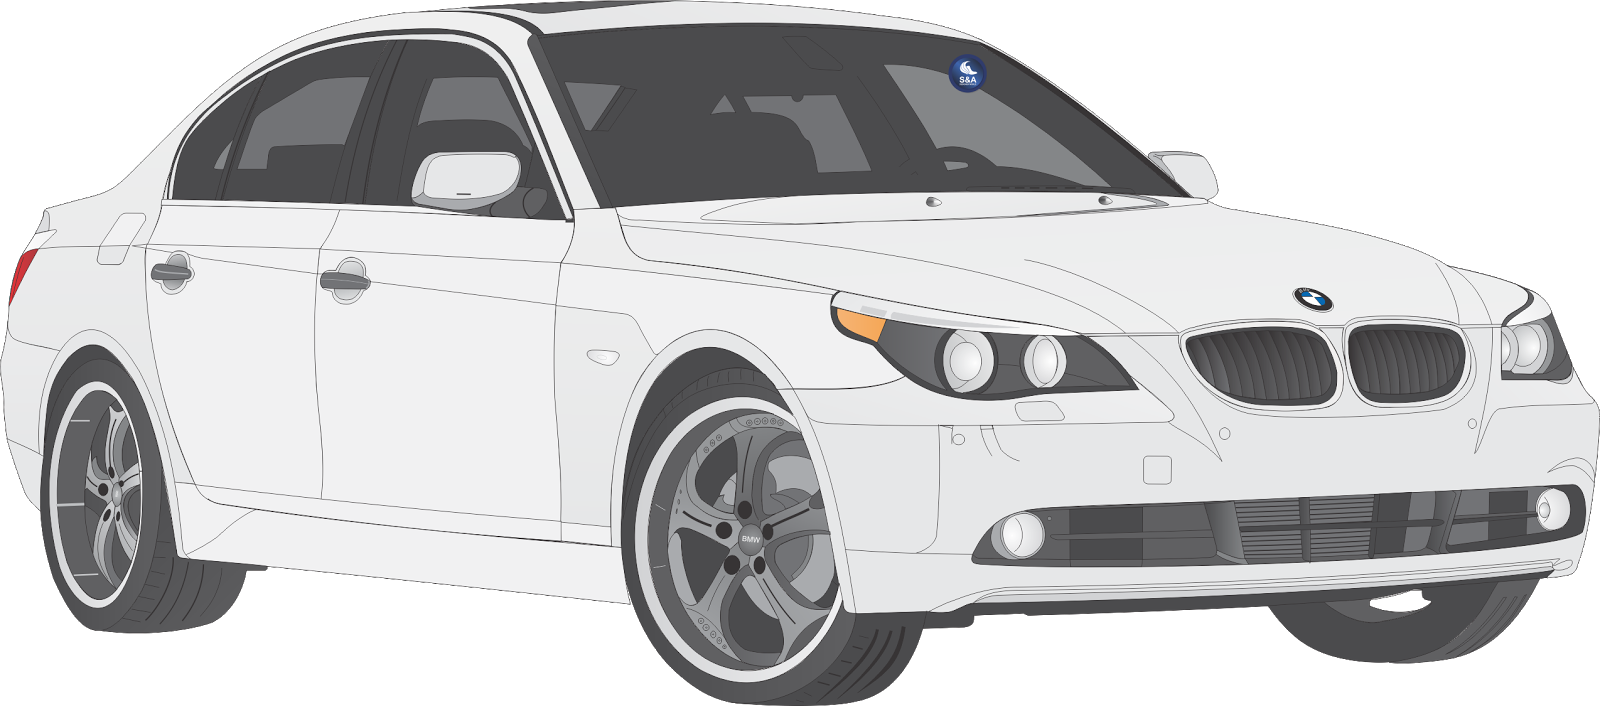 Bmw Car Vector, Png File Format - Bmw Flat Vector, Transparent background PNG HD thumbnail